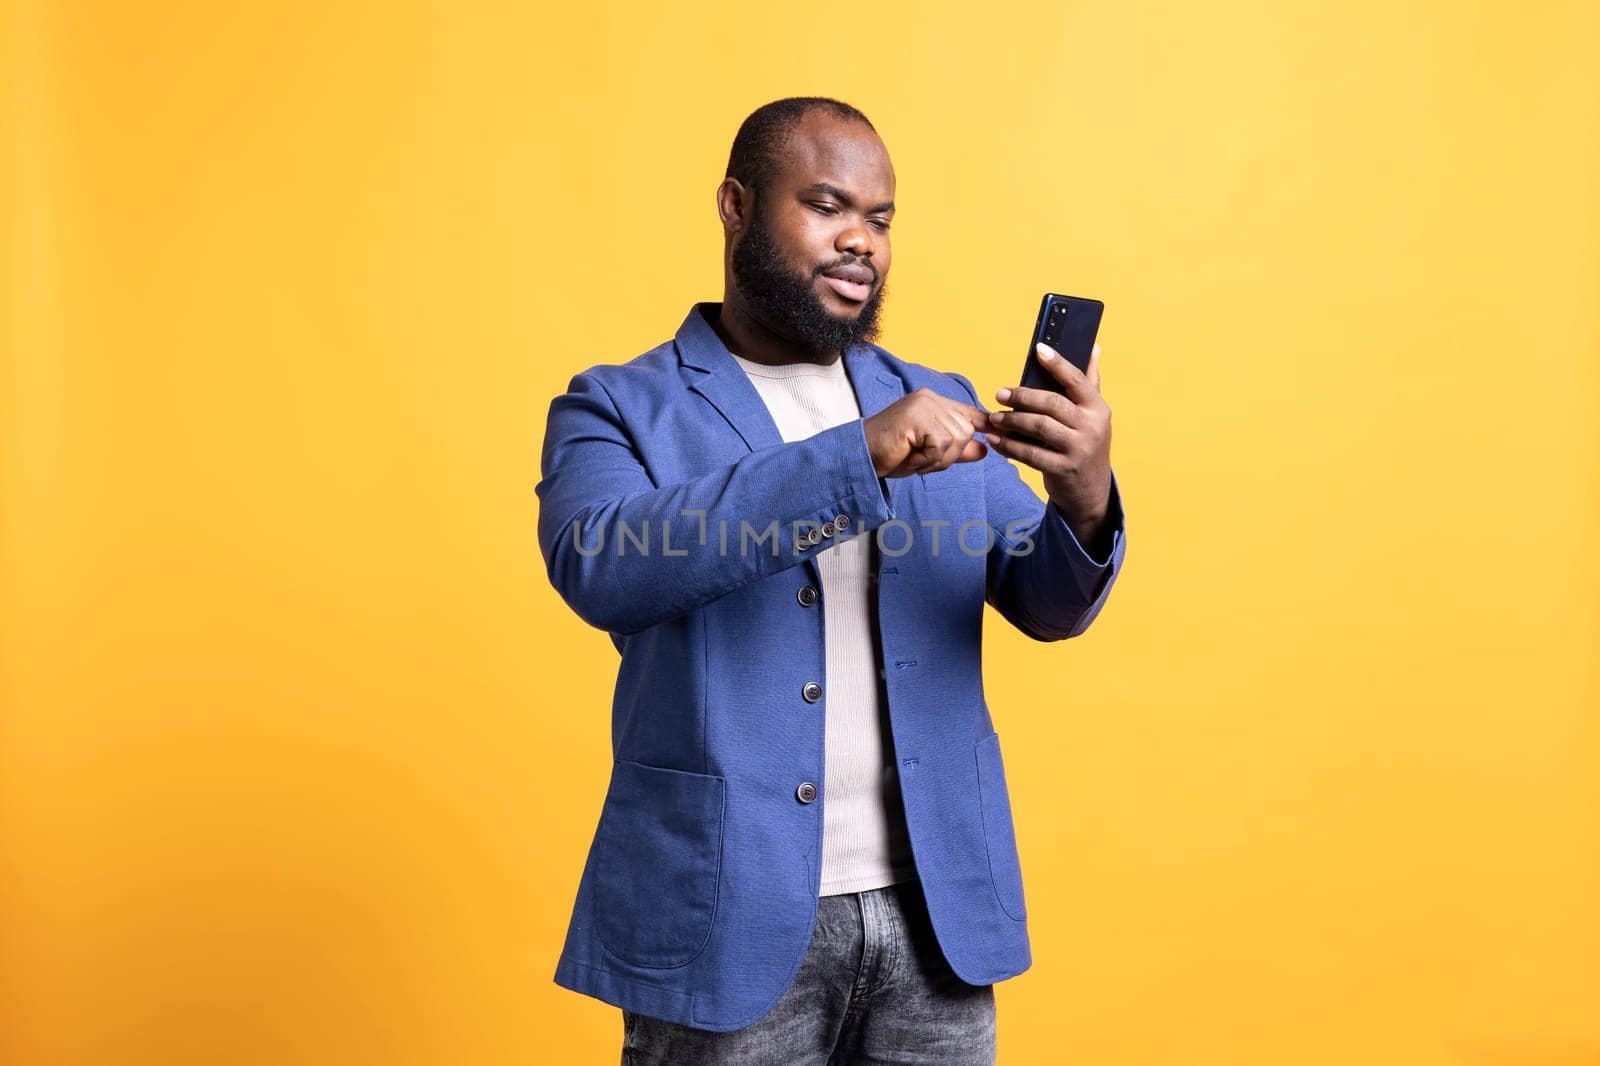 Man using mobile phone to check social media feed, studio background by DCStudio